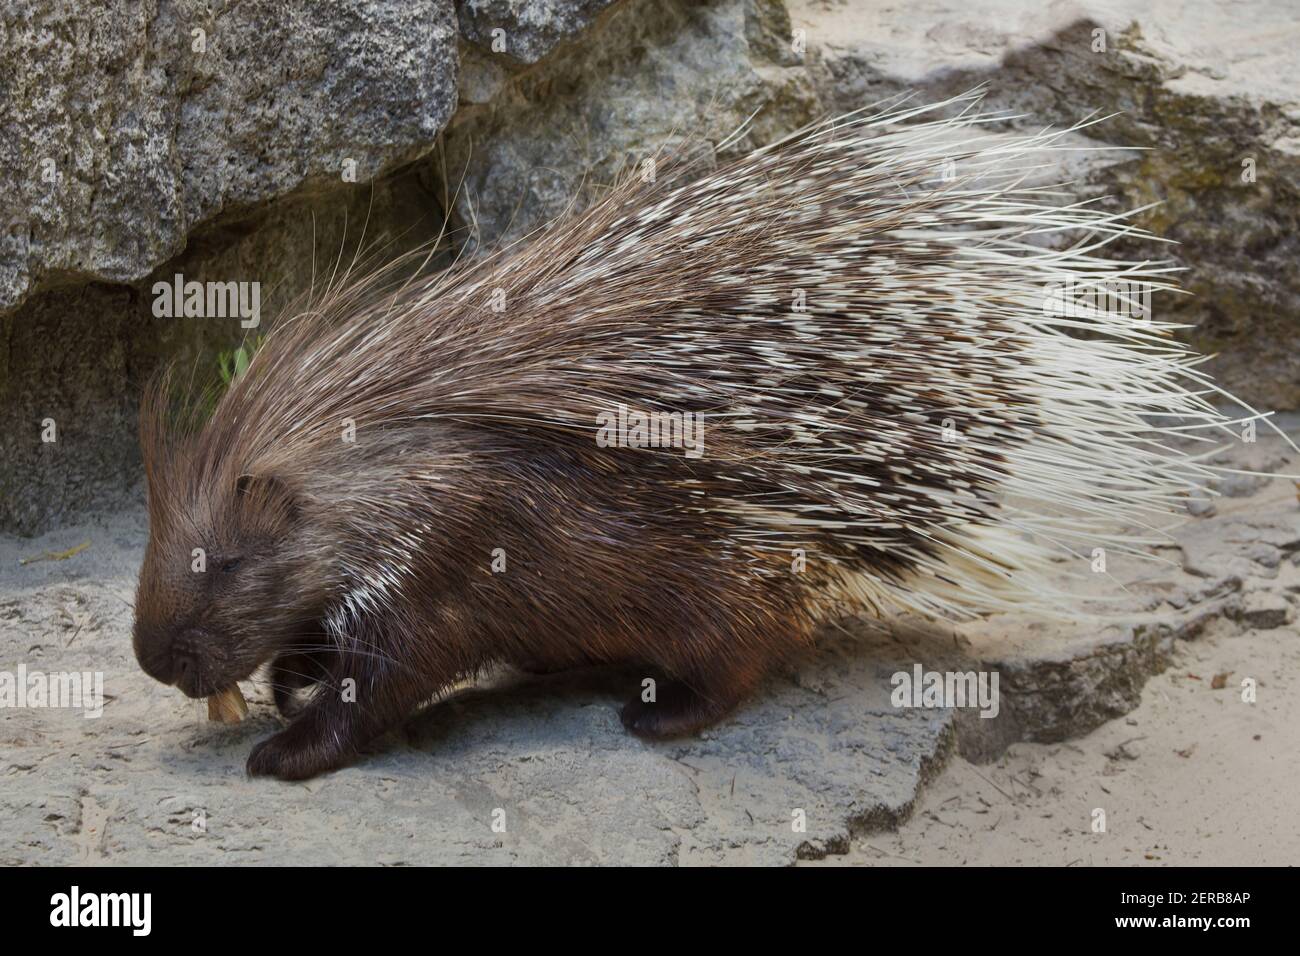 Indian crested porcupine (Hystrix indica), also known as the Indian porcupine. Stock Photo